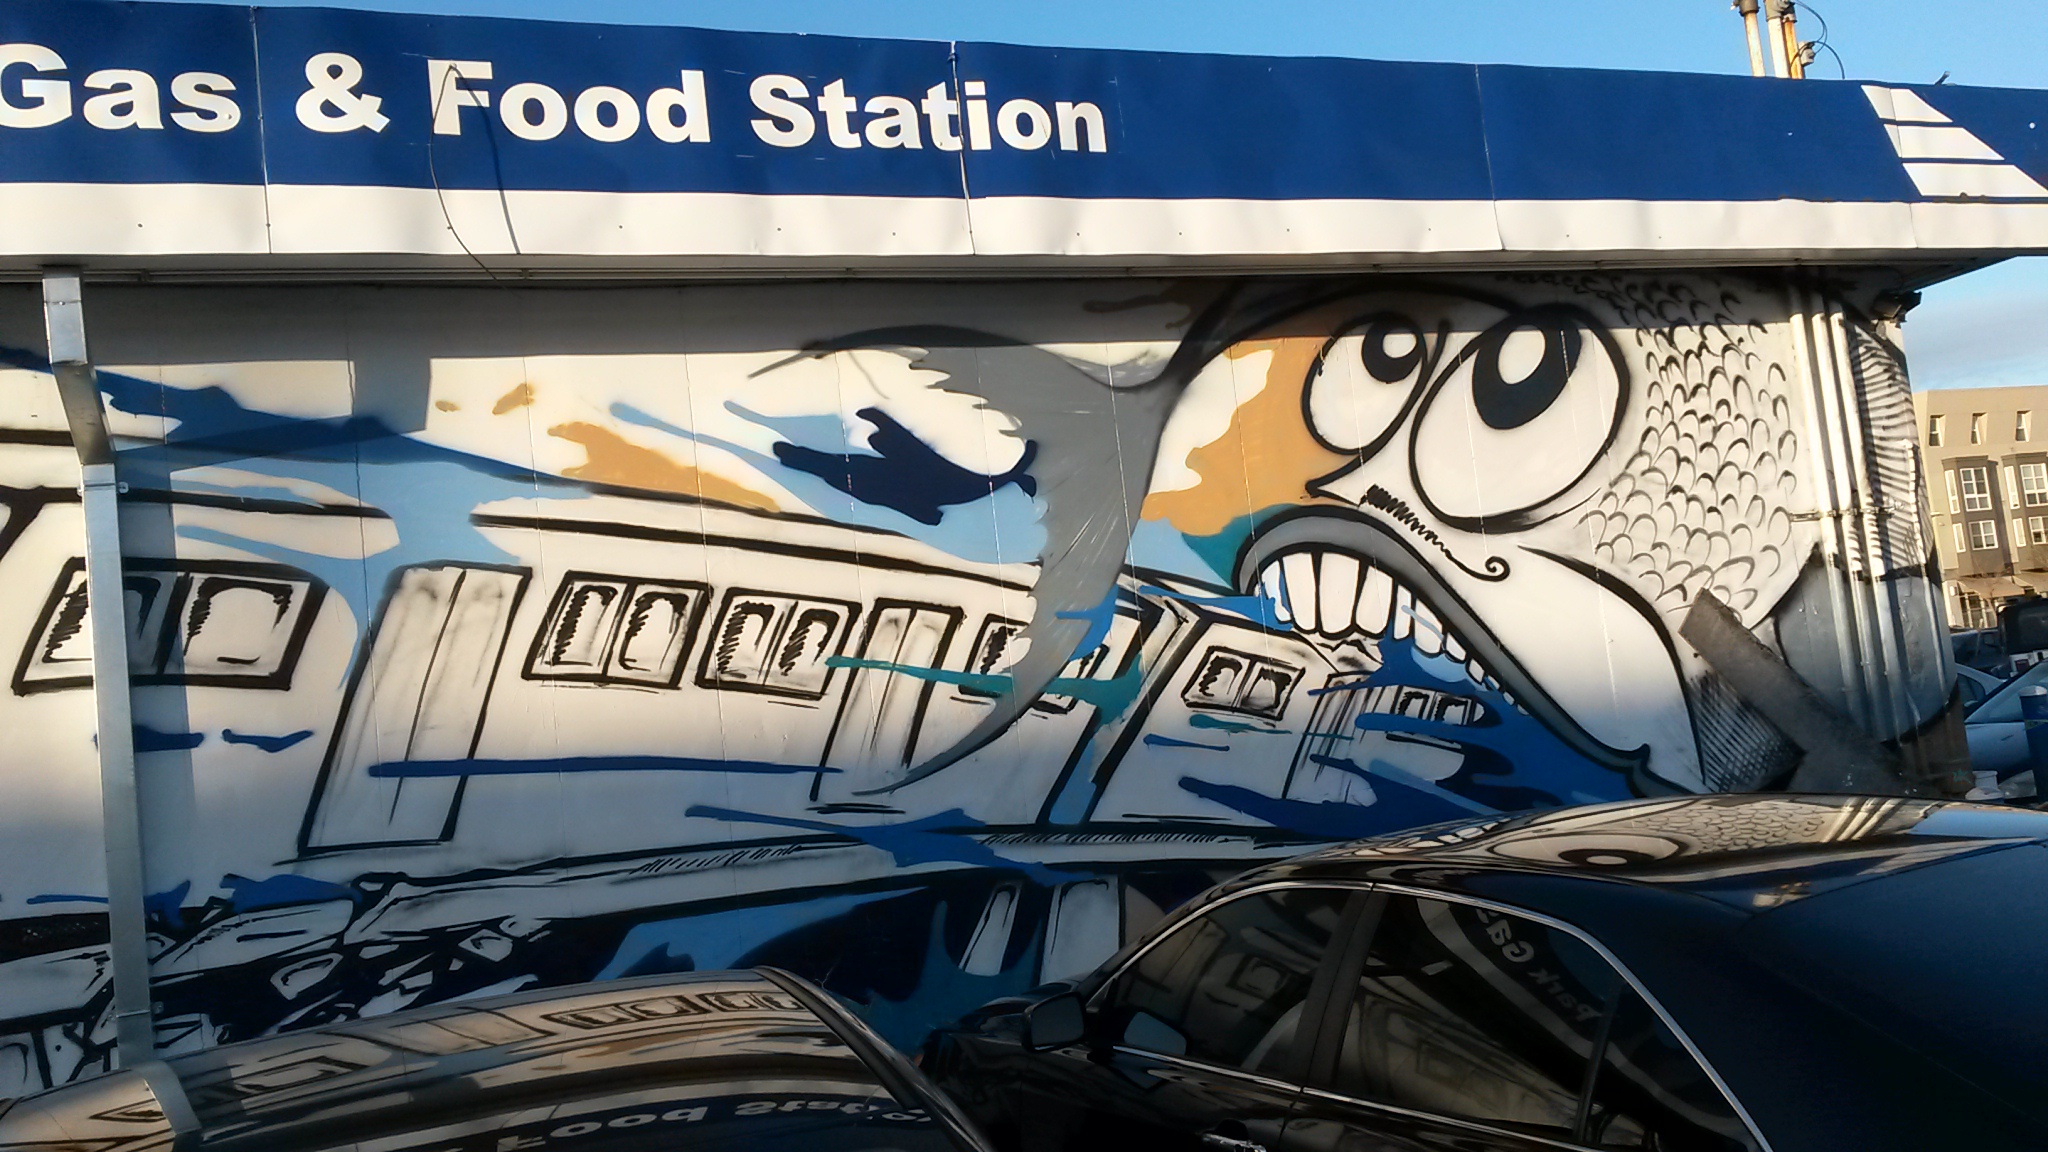 street art image of a train driving into the mouth of a giant fish